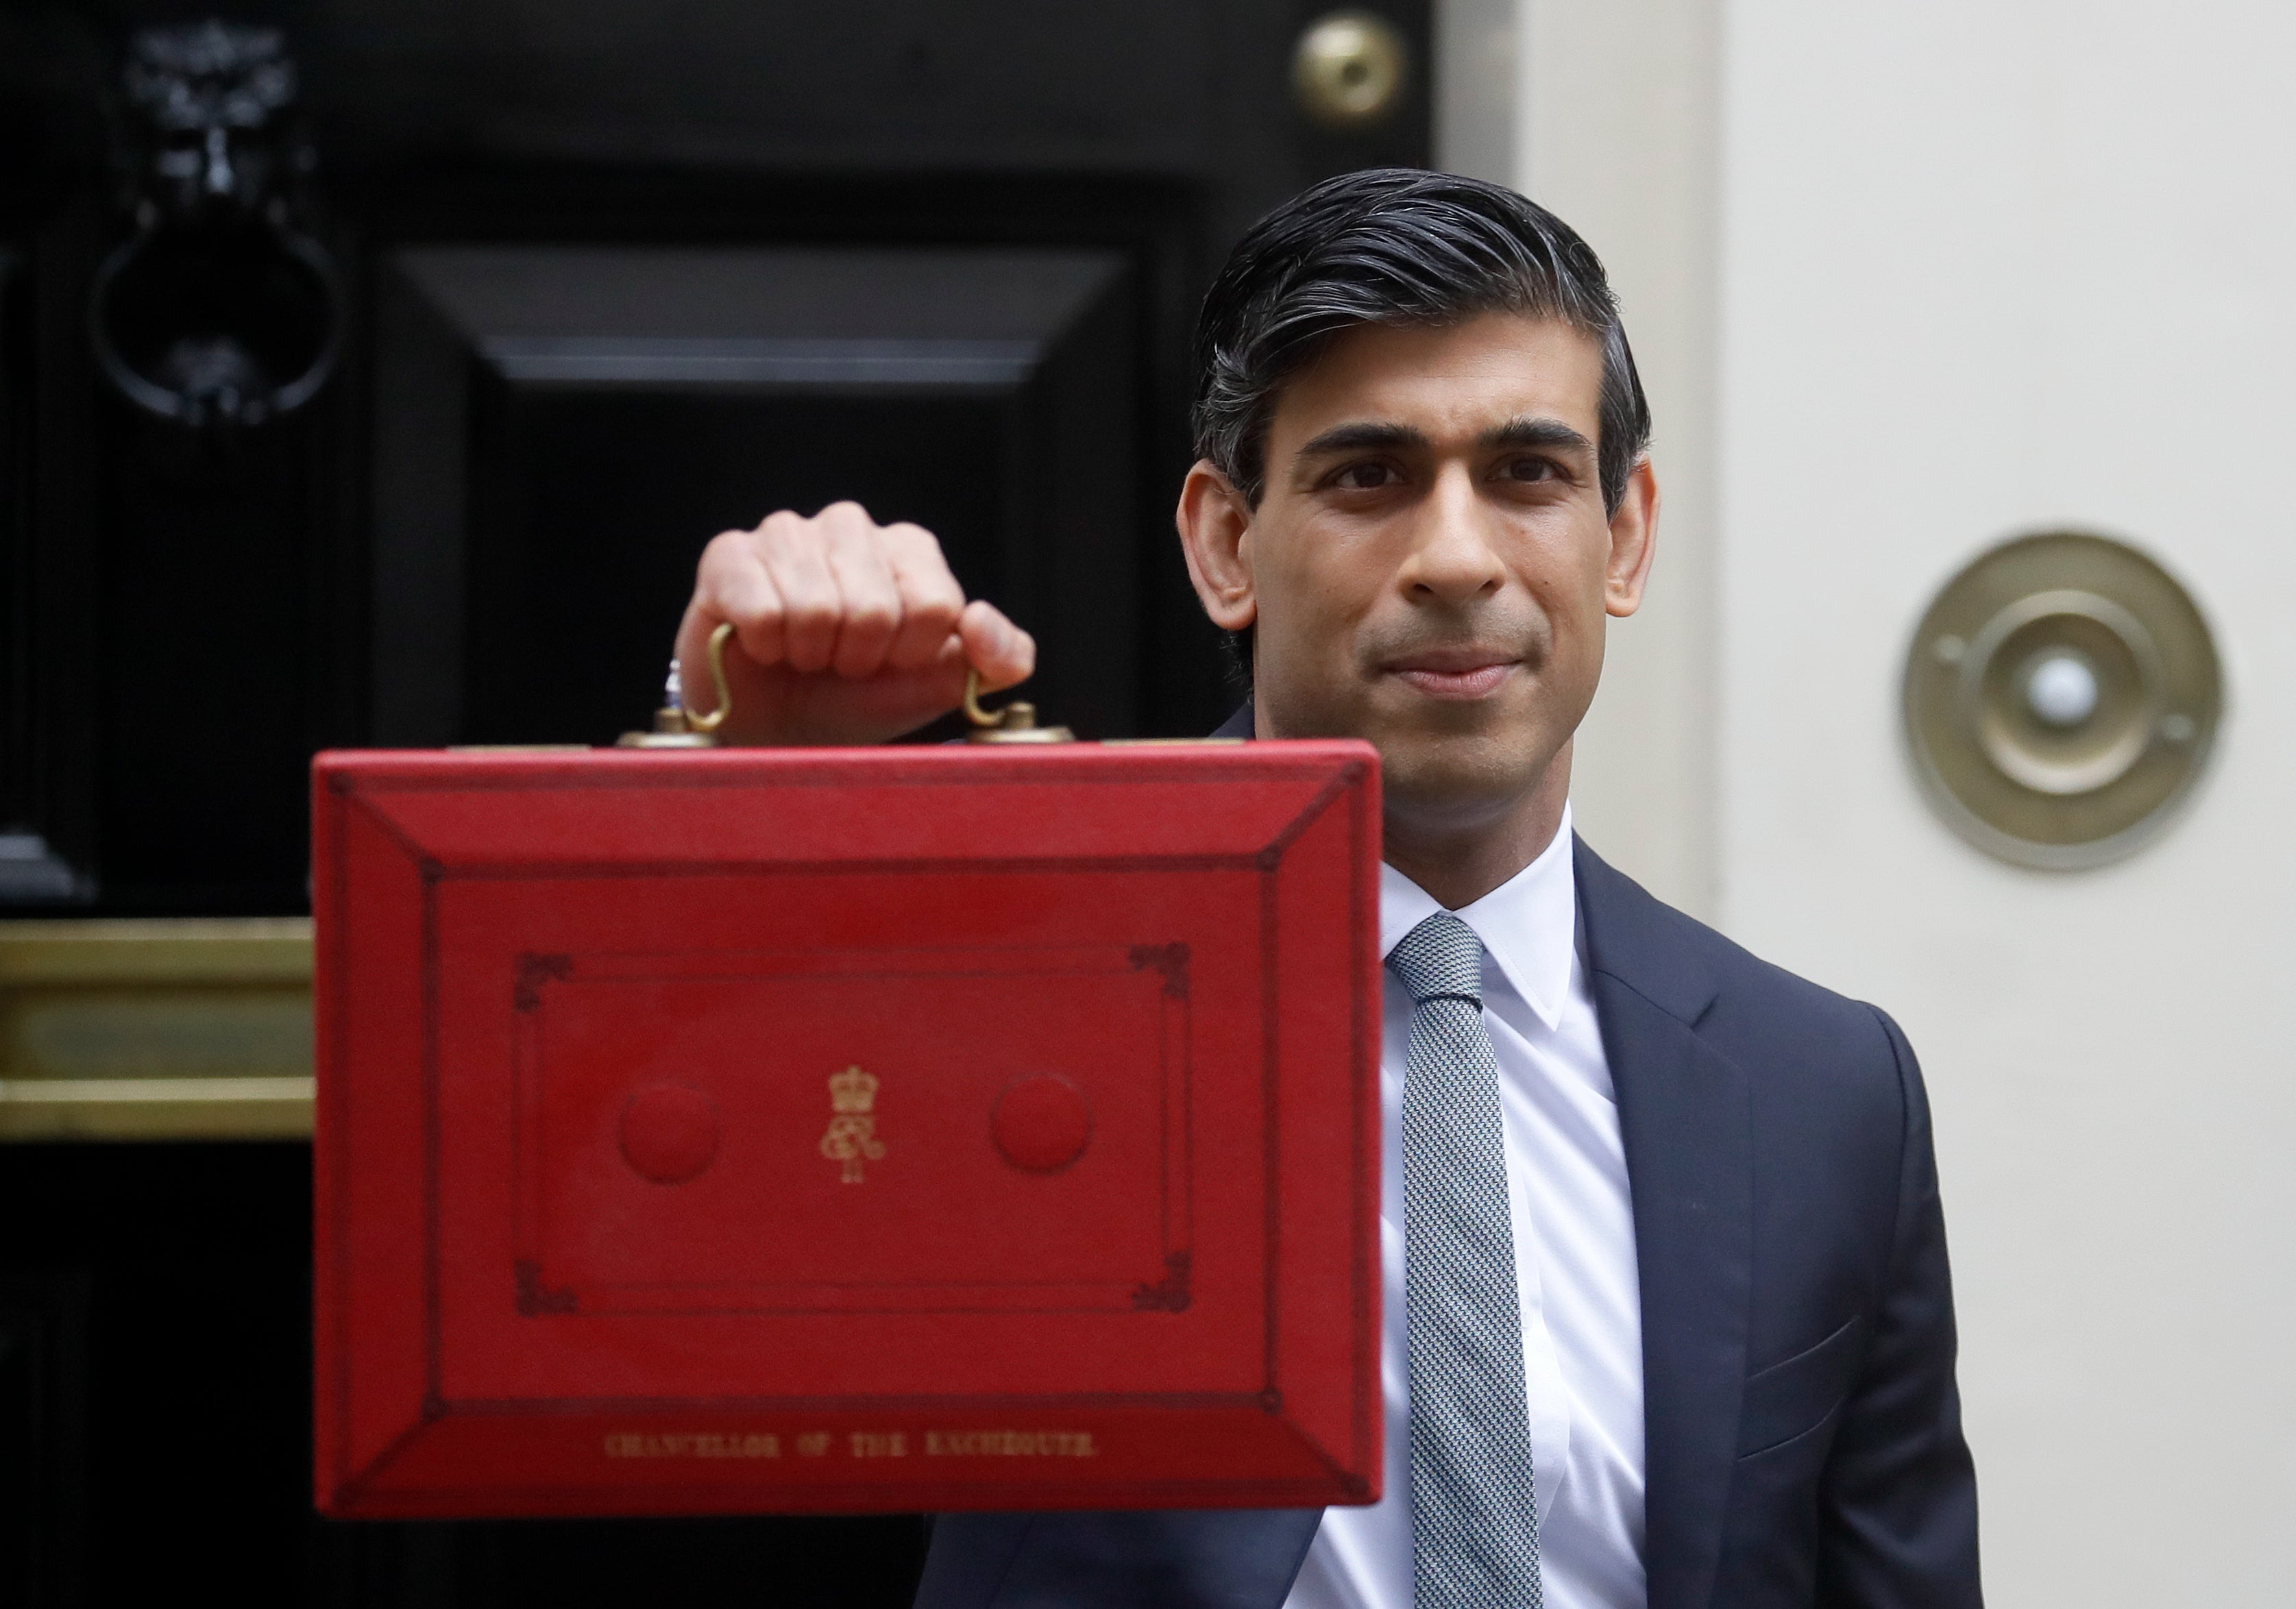 Chancellor Rishi Sunak got his Budget off to a fast start by announcing an extension to the furlough